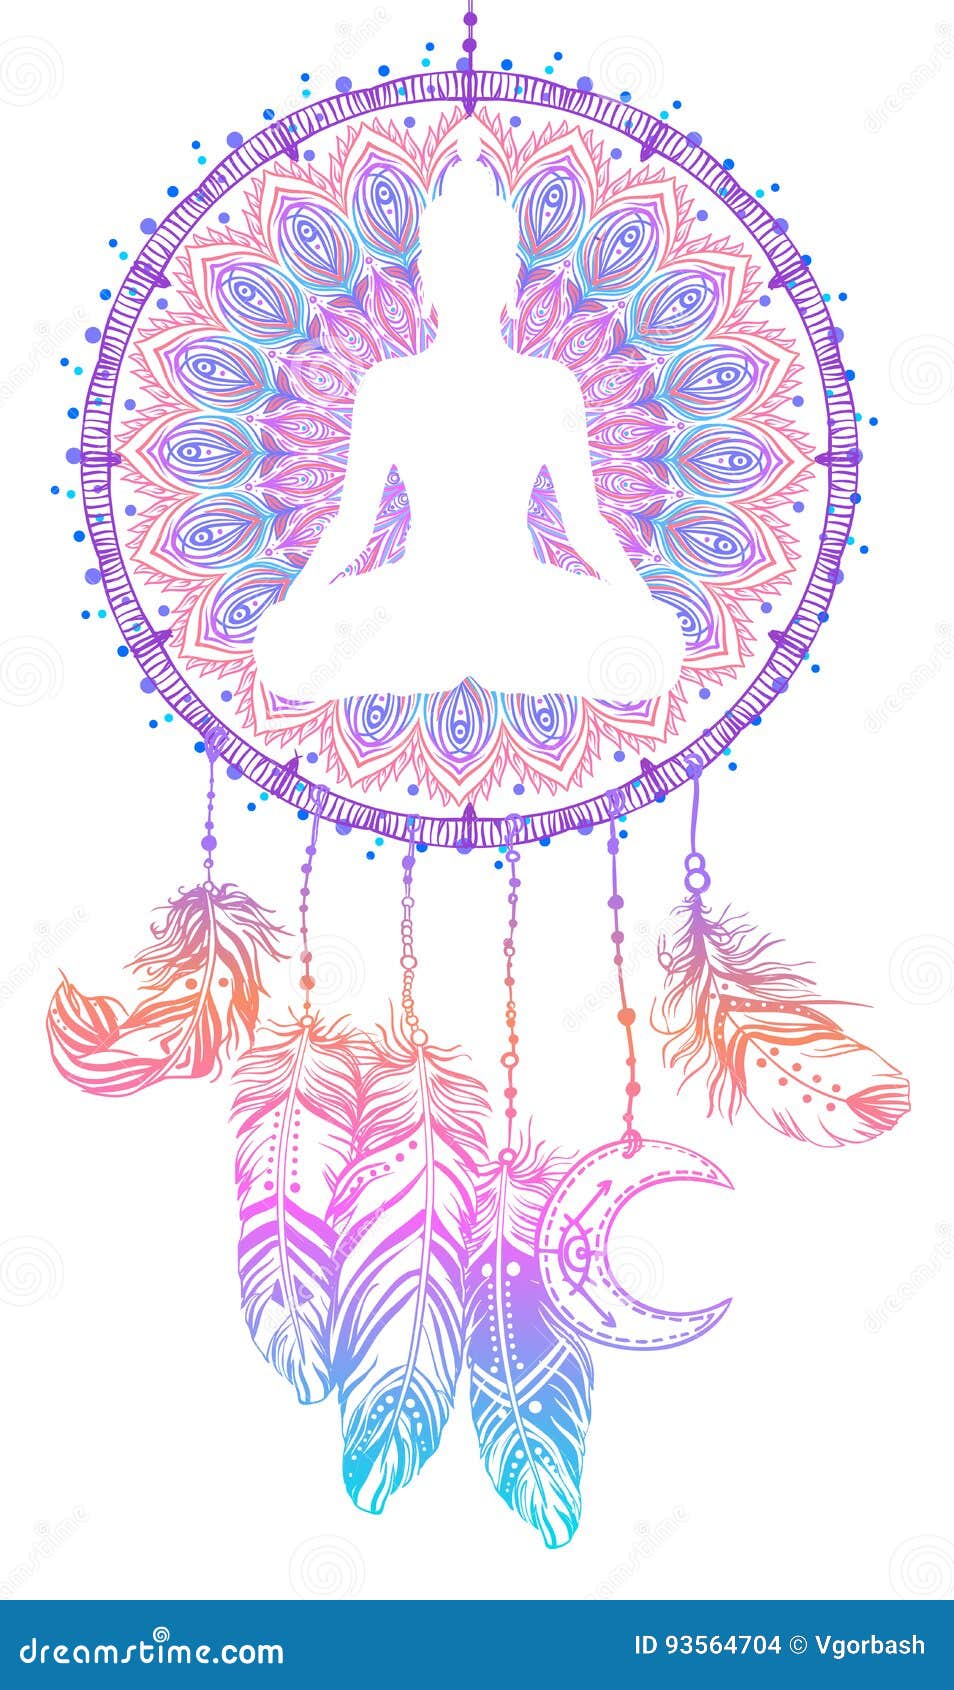 Buddha Silhouette Over Dreamcatcher Round Pattern. Esoteric Vintage Vector  Illustration. Indian, Buddhism, Spiritual Art Stock Vector - Illustration  of decoration, harmony: 93564704